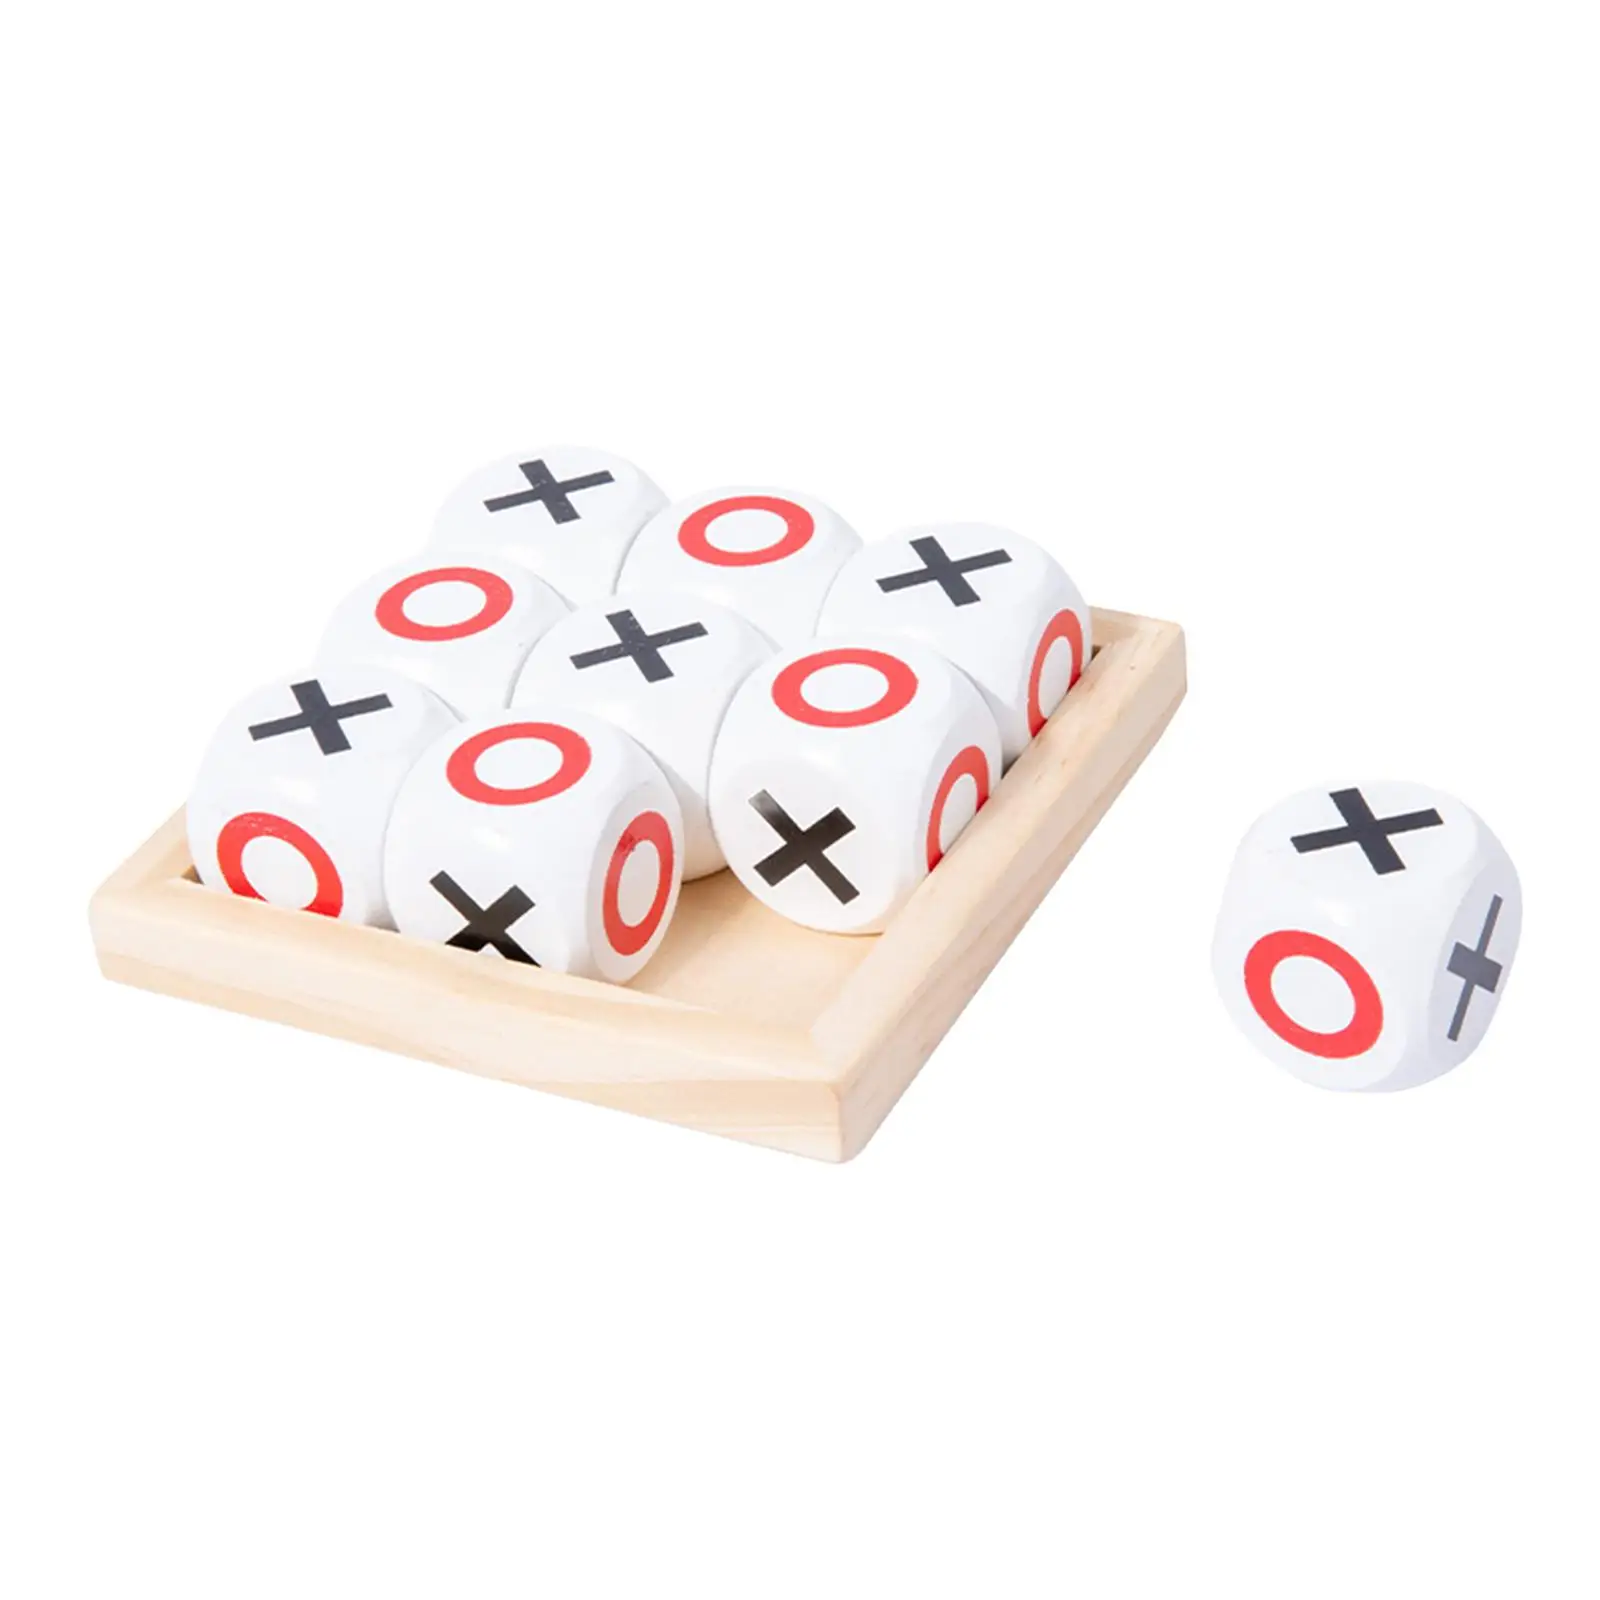 Tic TAC Toe Board Game Xoxo Chess Board Game Fun Hand Crafted Noughts and Crosses for Kids Outdoor Indoor Adults Gifts Travel